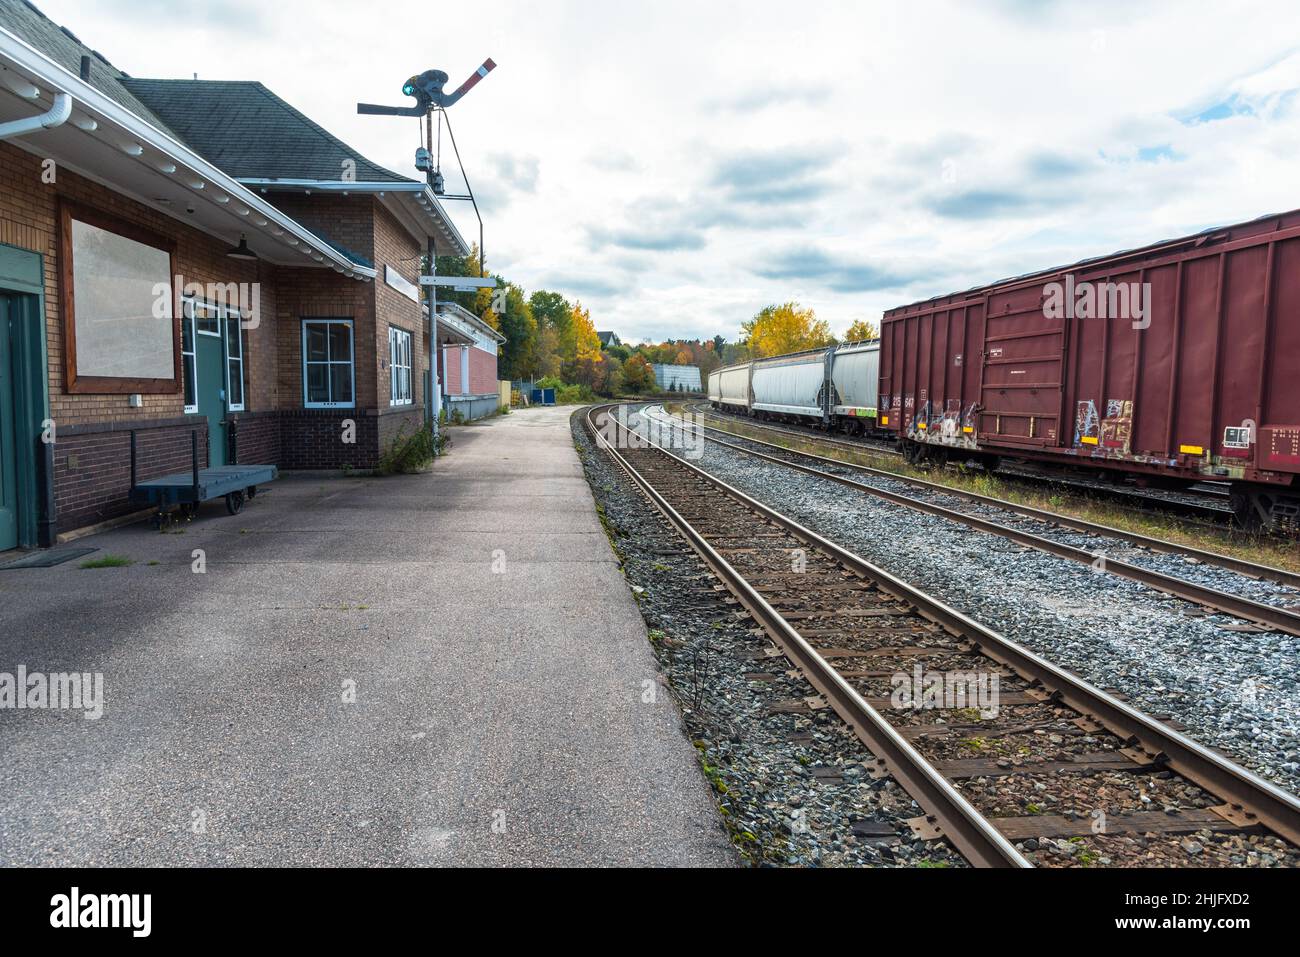 Cargo railcars in a deserted station on a cloudy autumn day Stock Photo